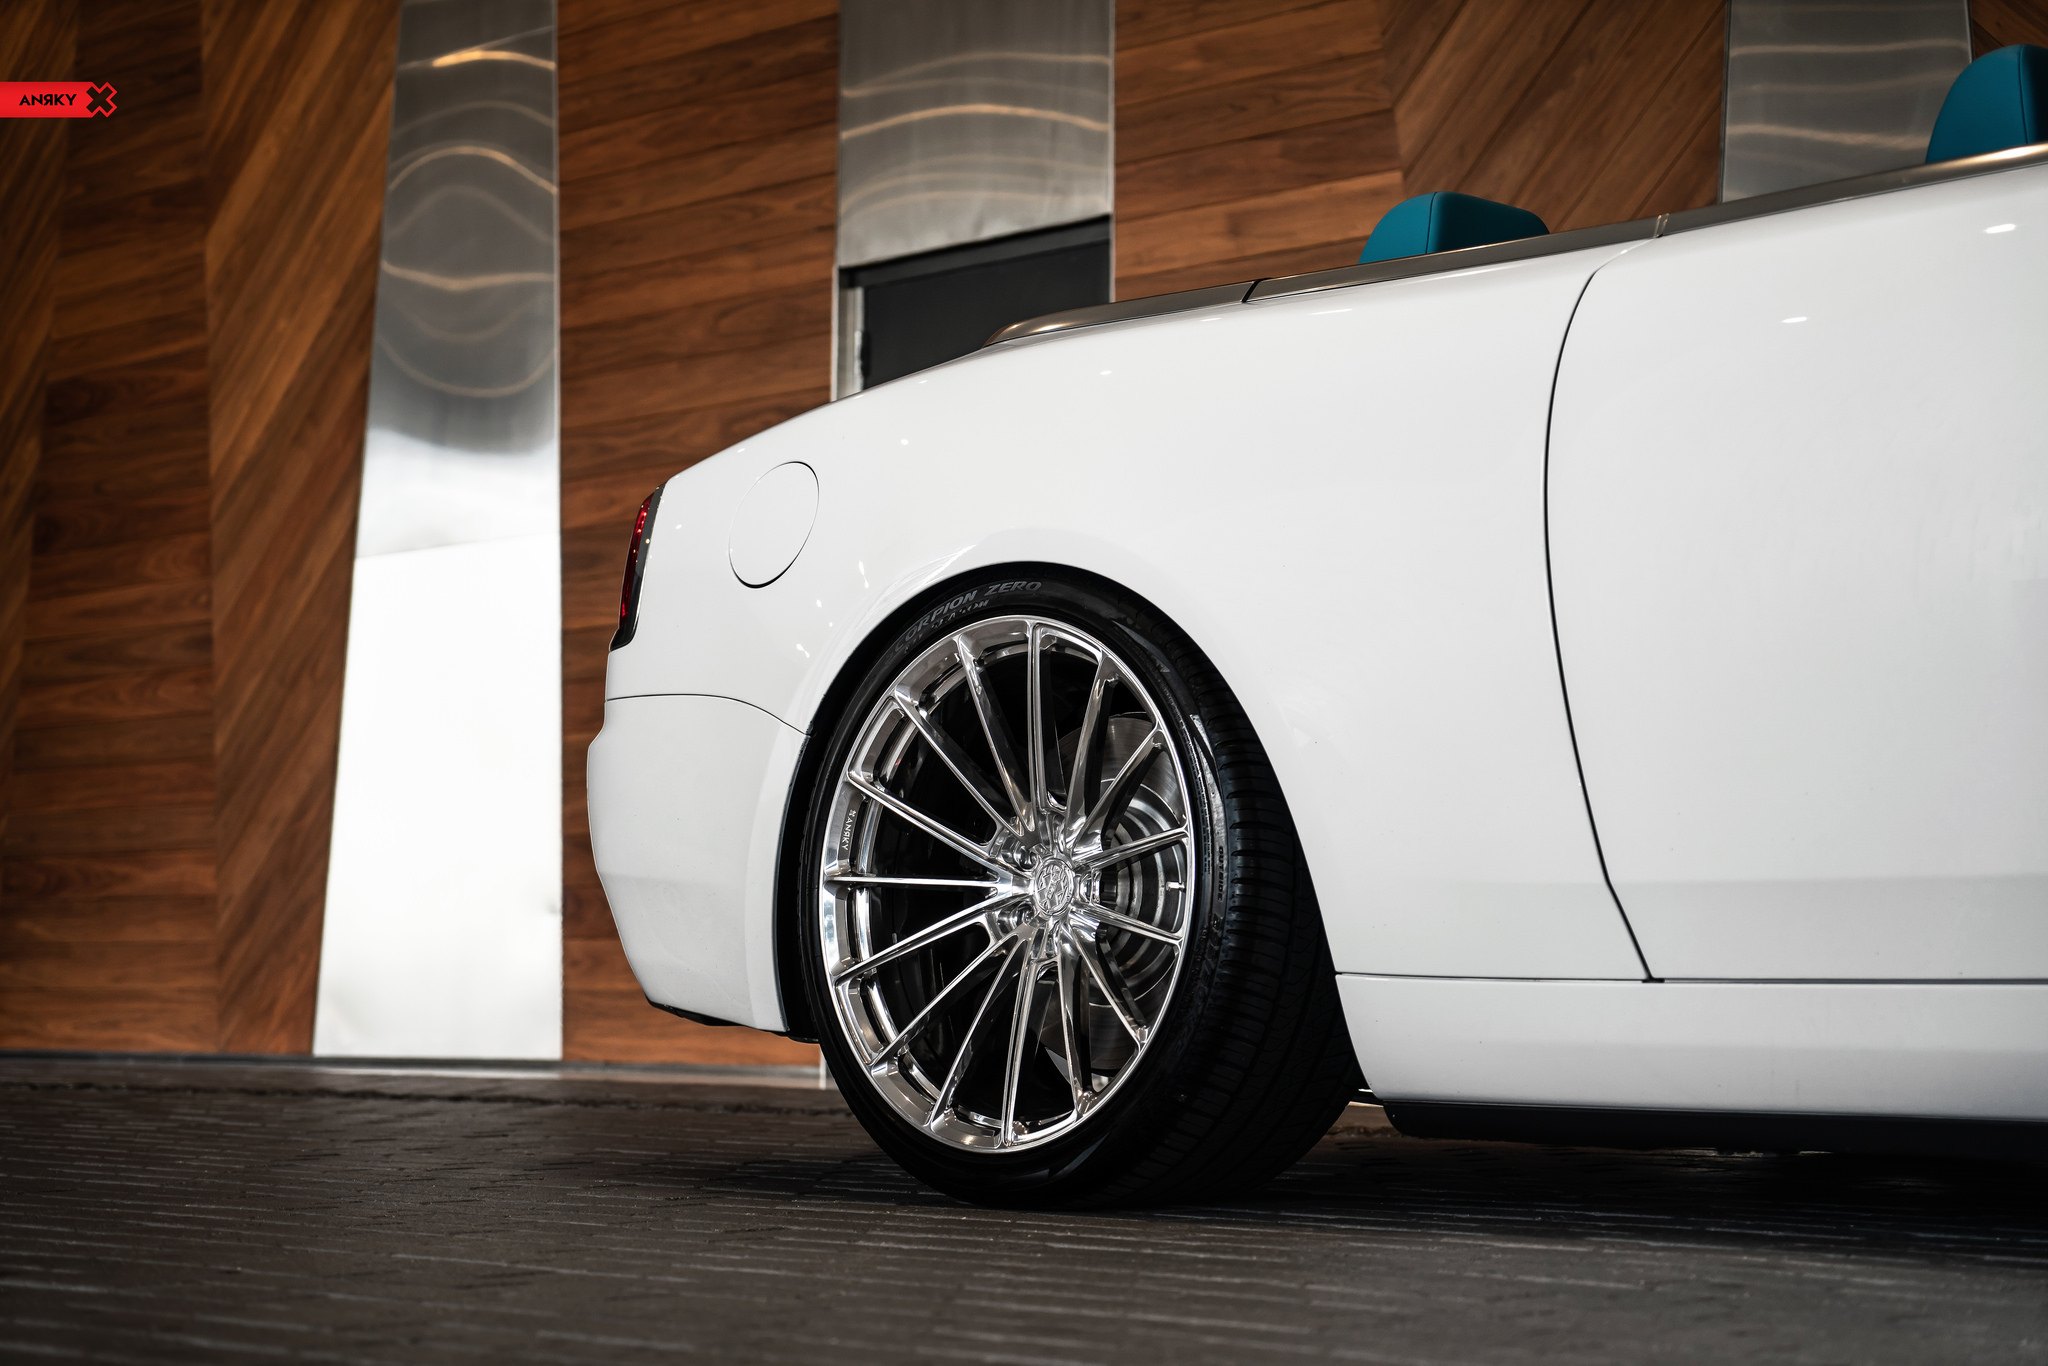 Chrome Anrky Wheels on White Convertible Rolls Royce Dawn - Photo by ANRKY Wheels